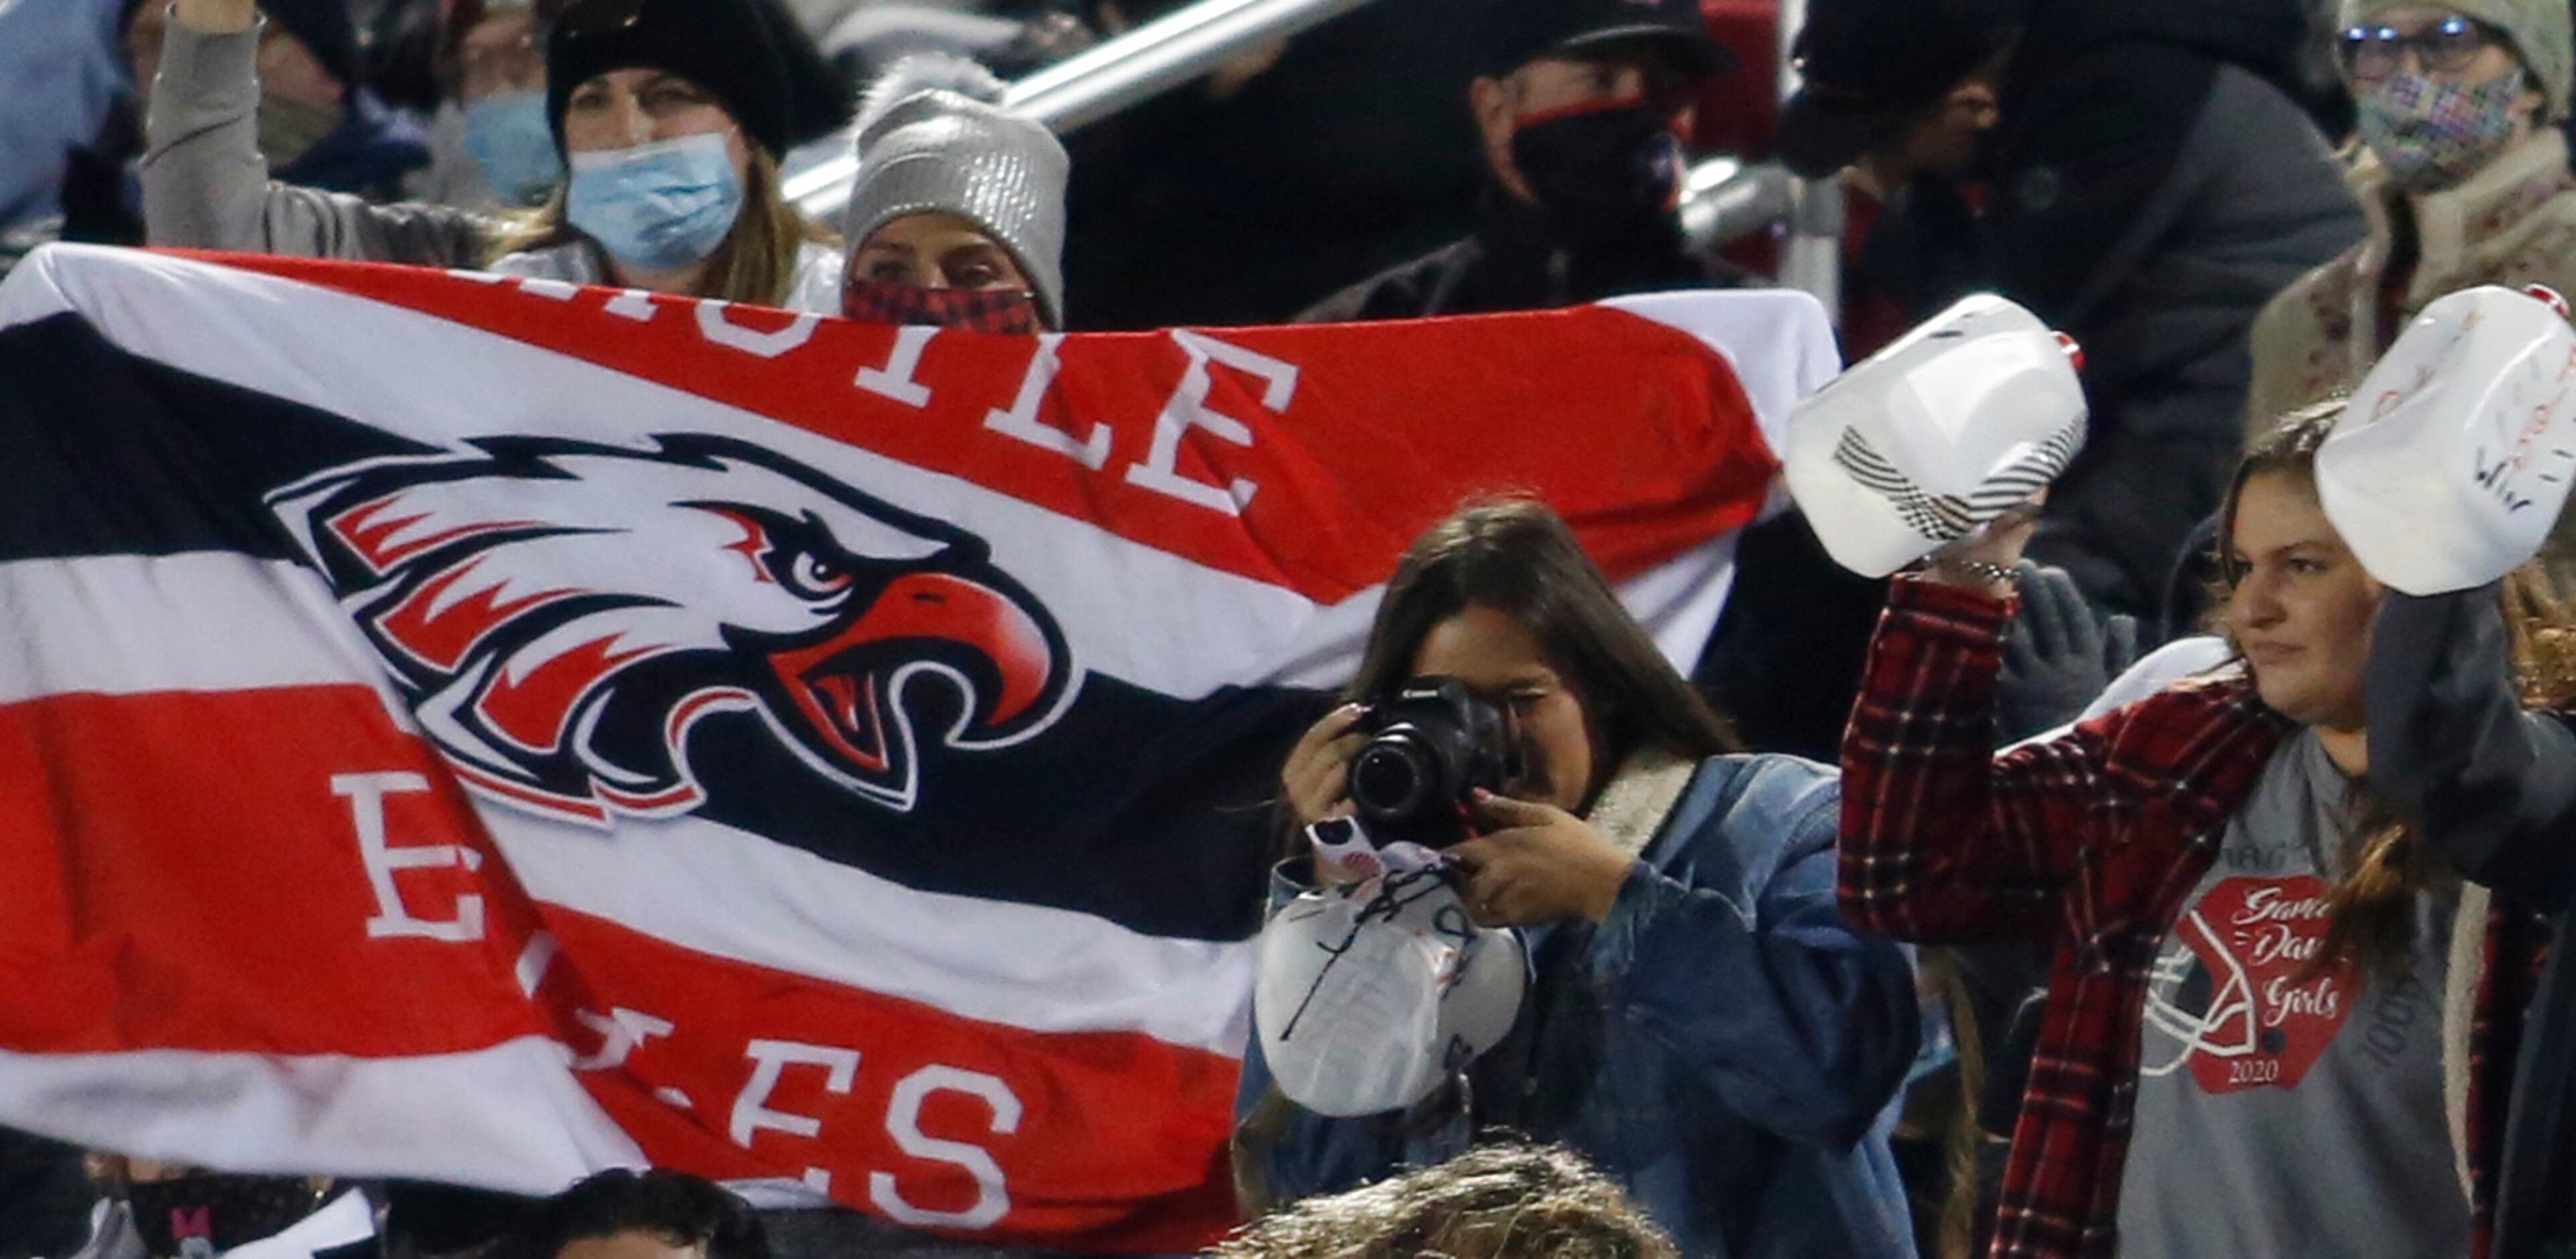 Argyle fans were out in force to support the Eagles in their game against Waco La Vega. The...